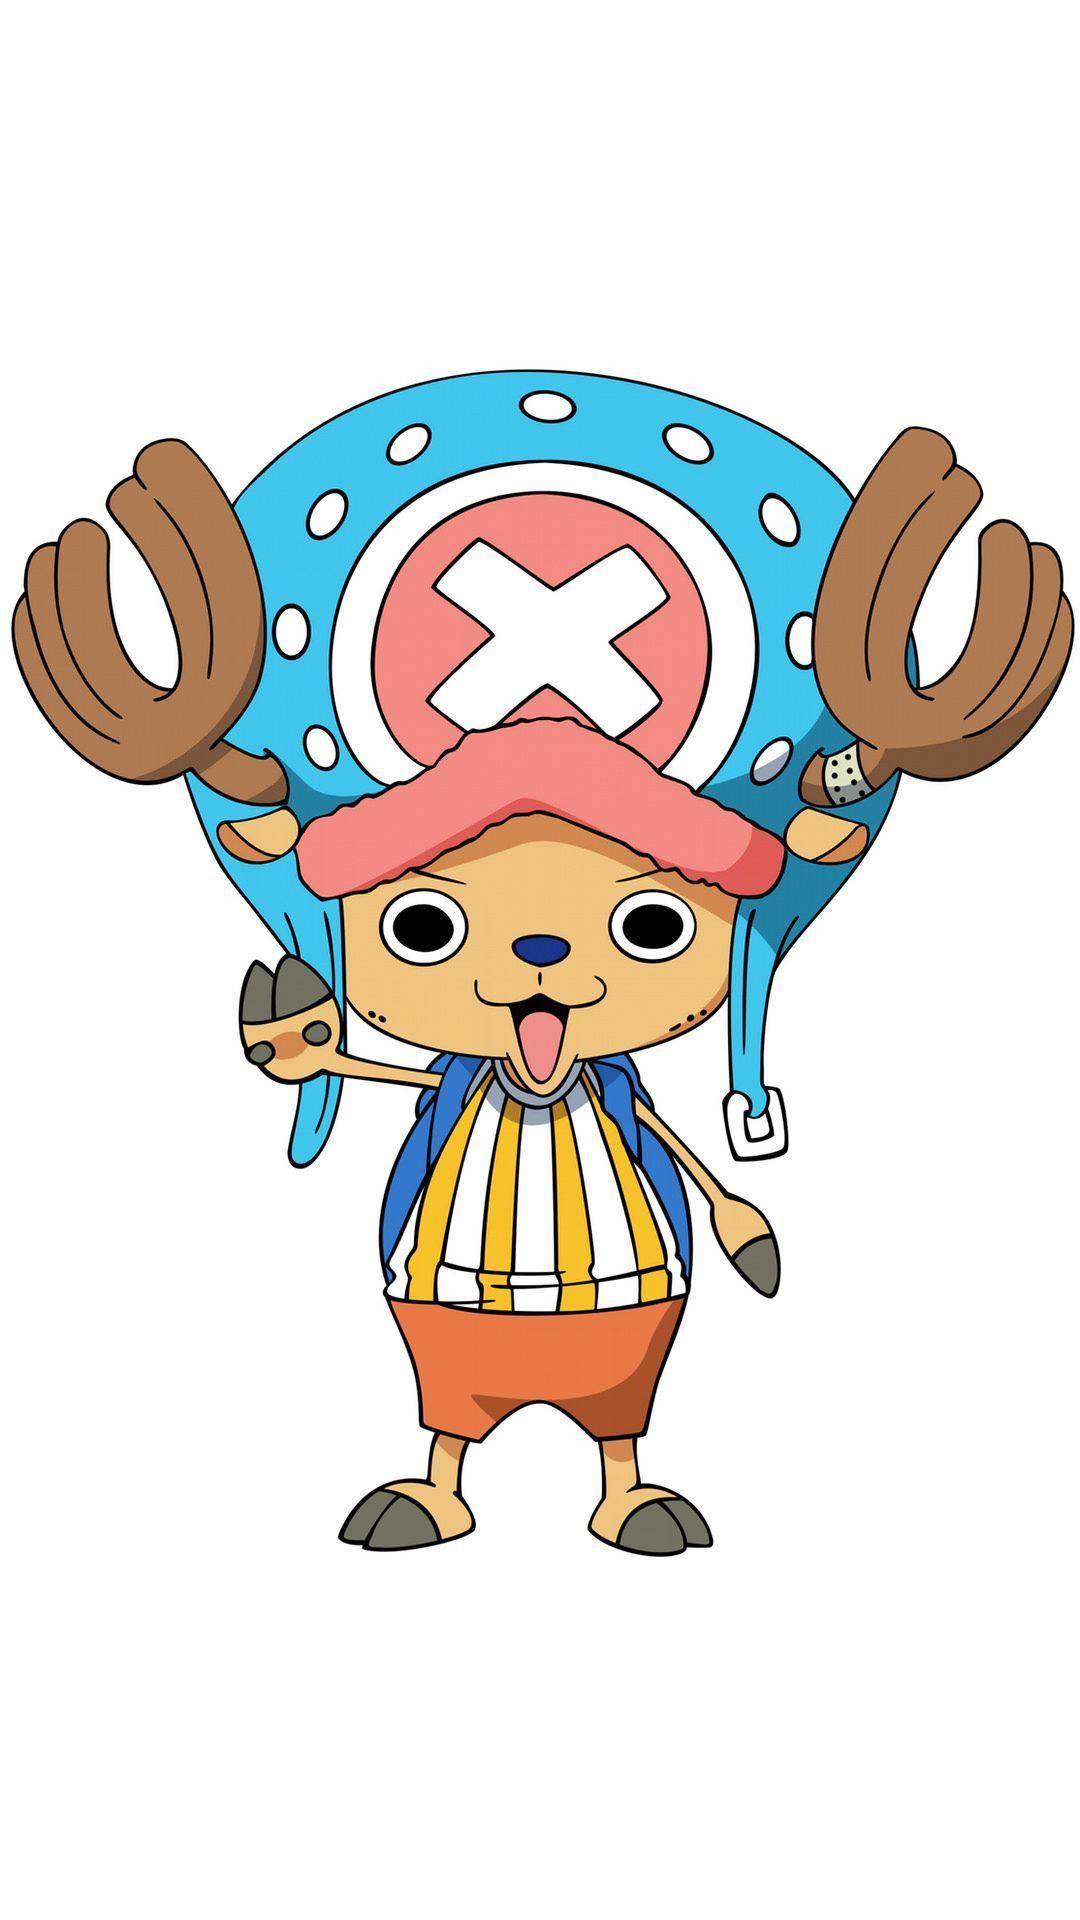 270+ Tony Tony Chopper HD Wallpapers and Backgrounds